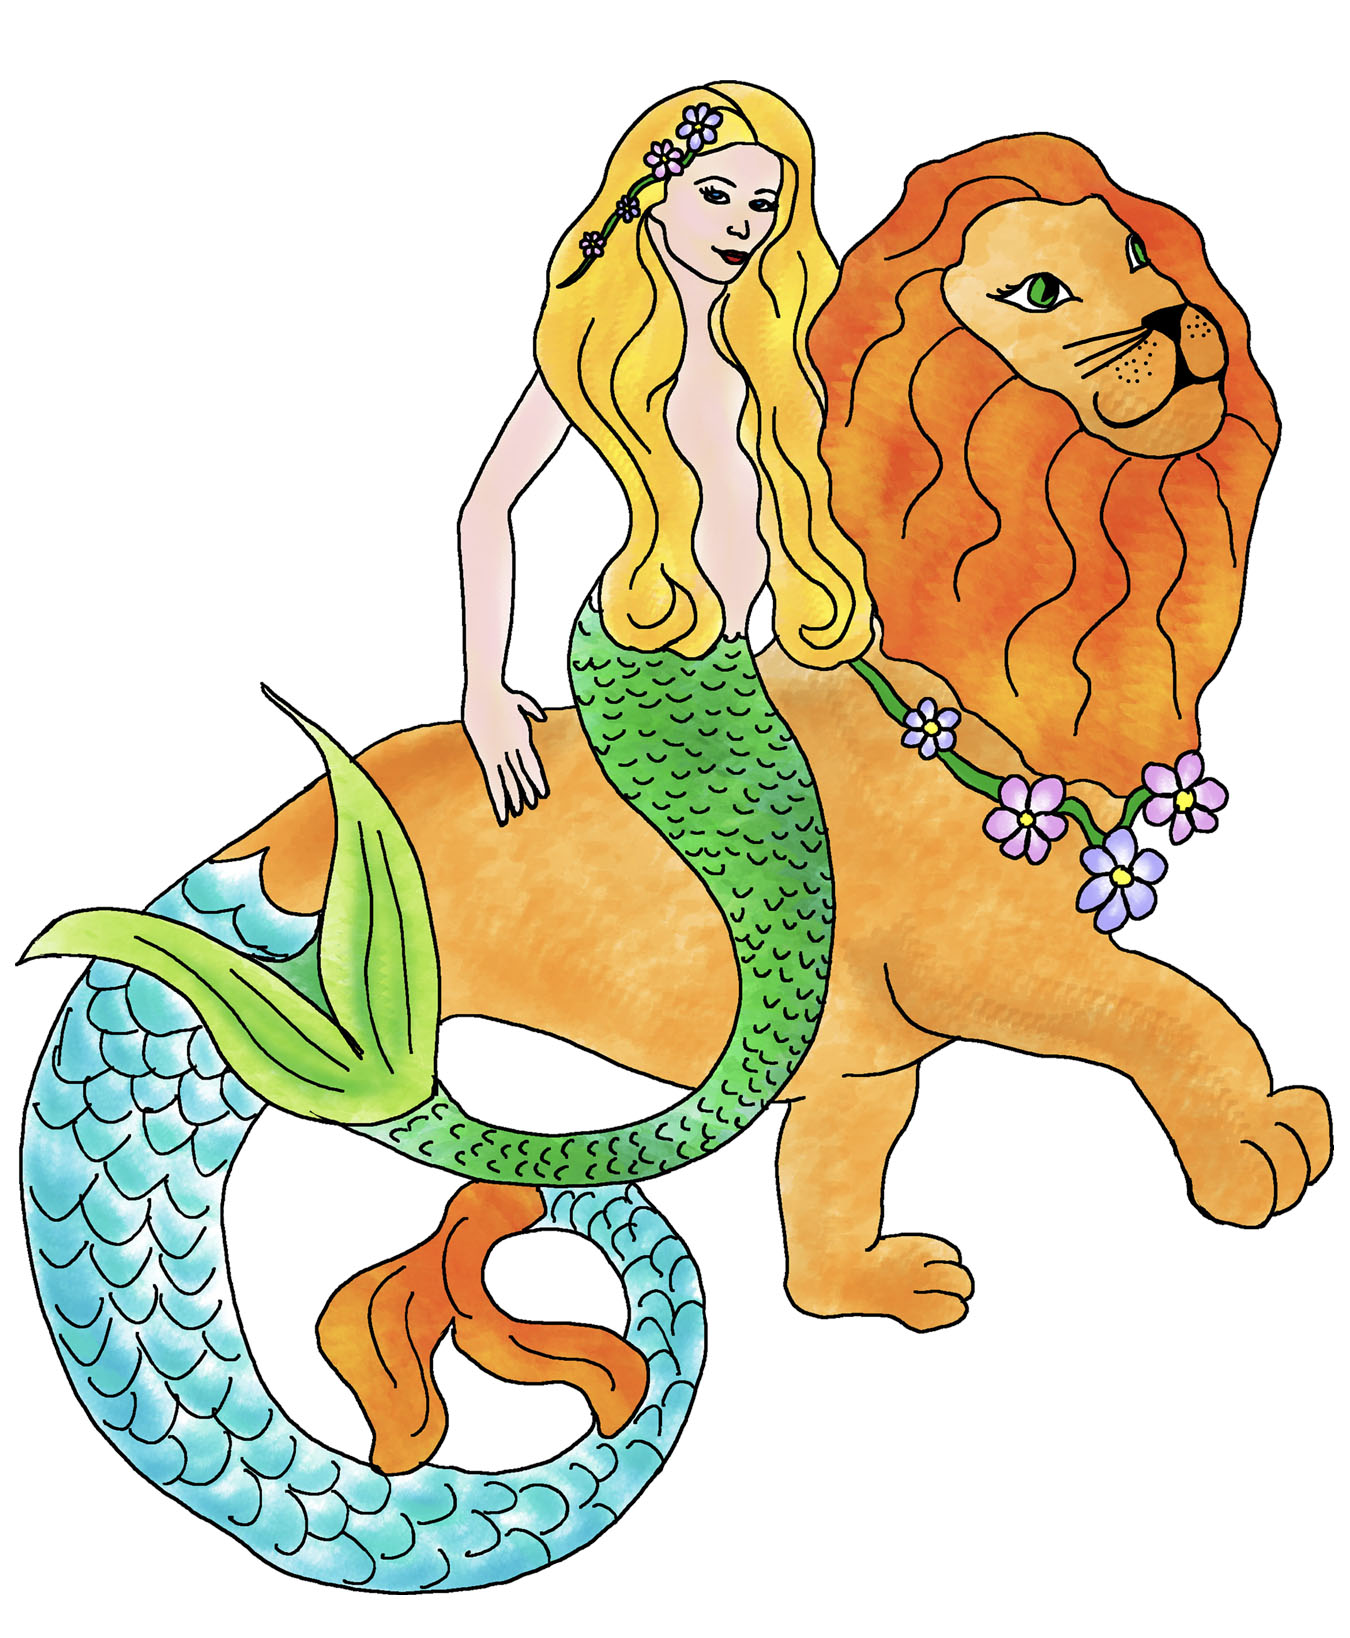 Mermaid and Lion